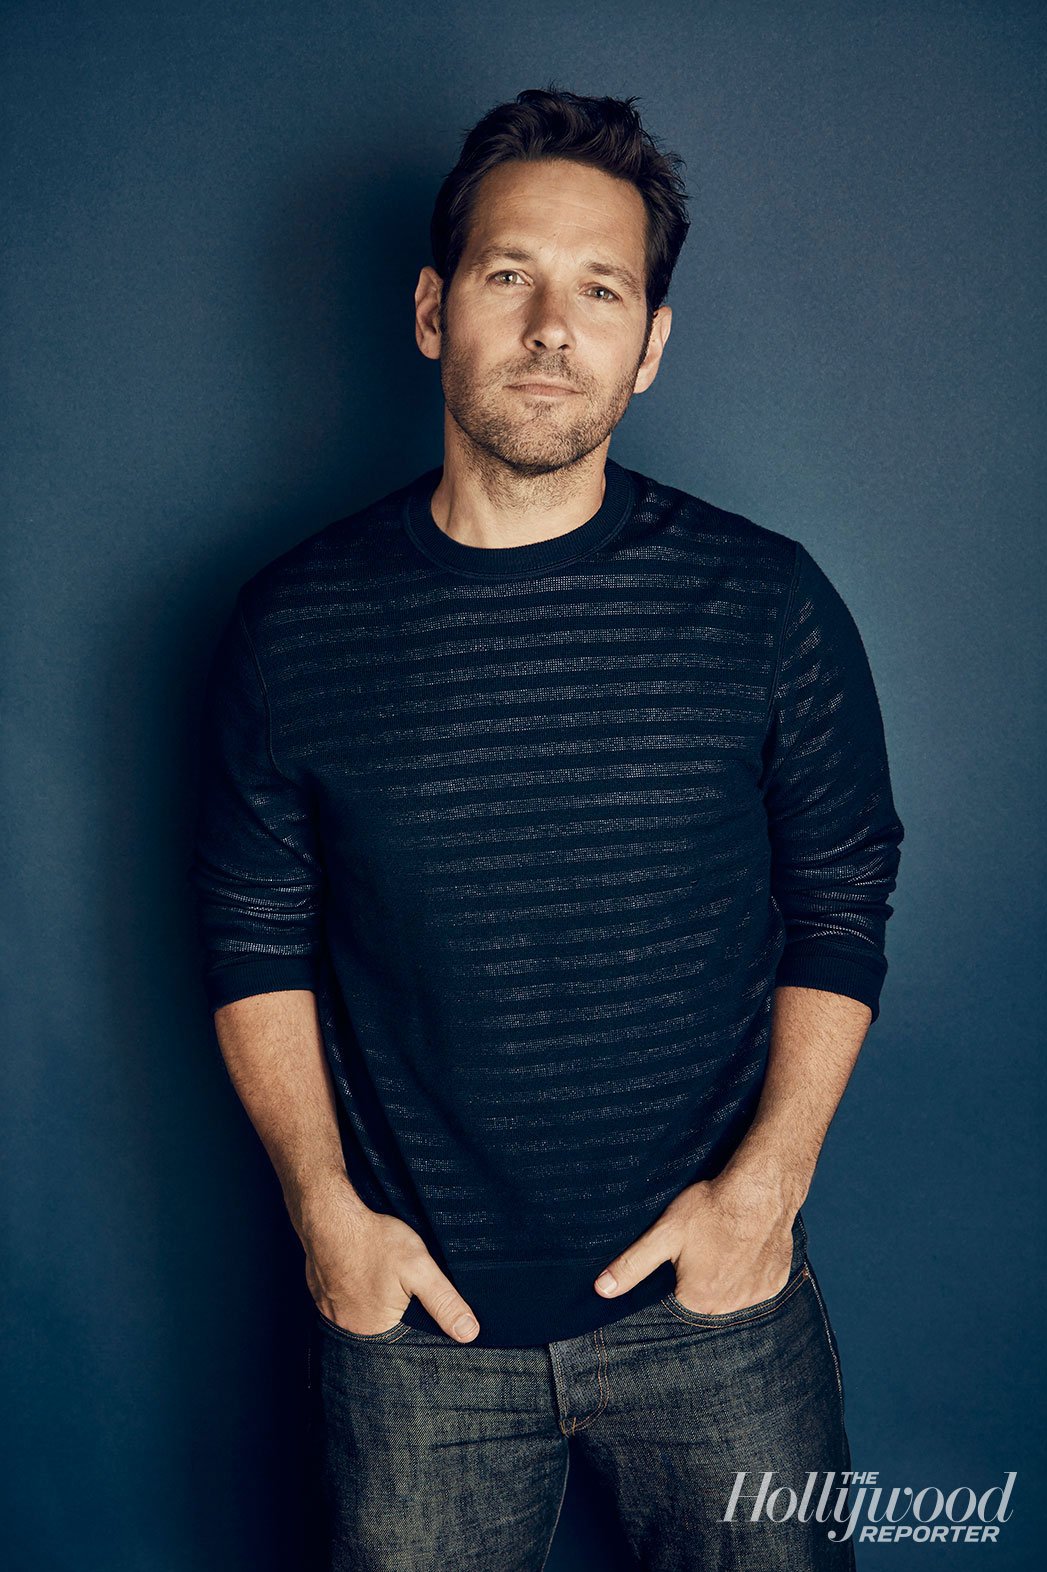 Paul Rudd Talks 'Ant-Man' with The Hollywood Reporter – The Fashionisto